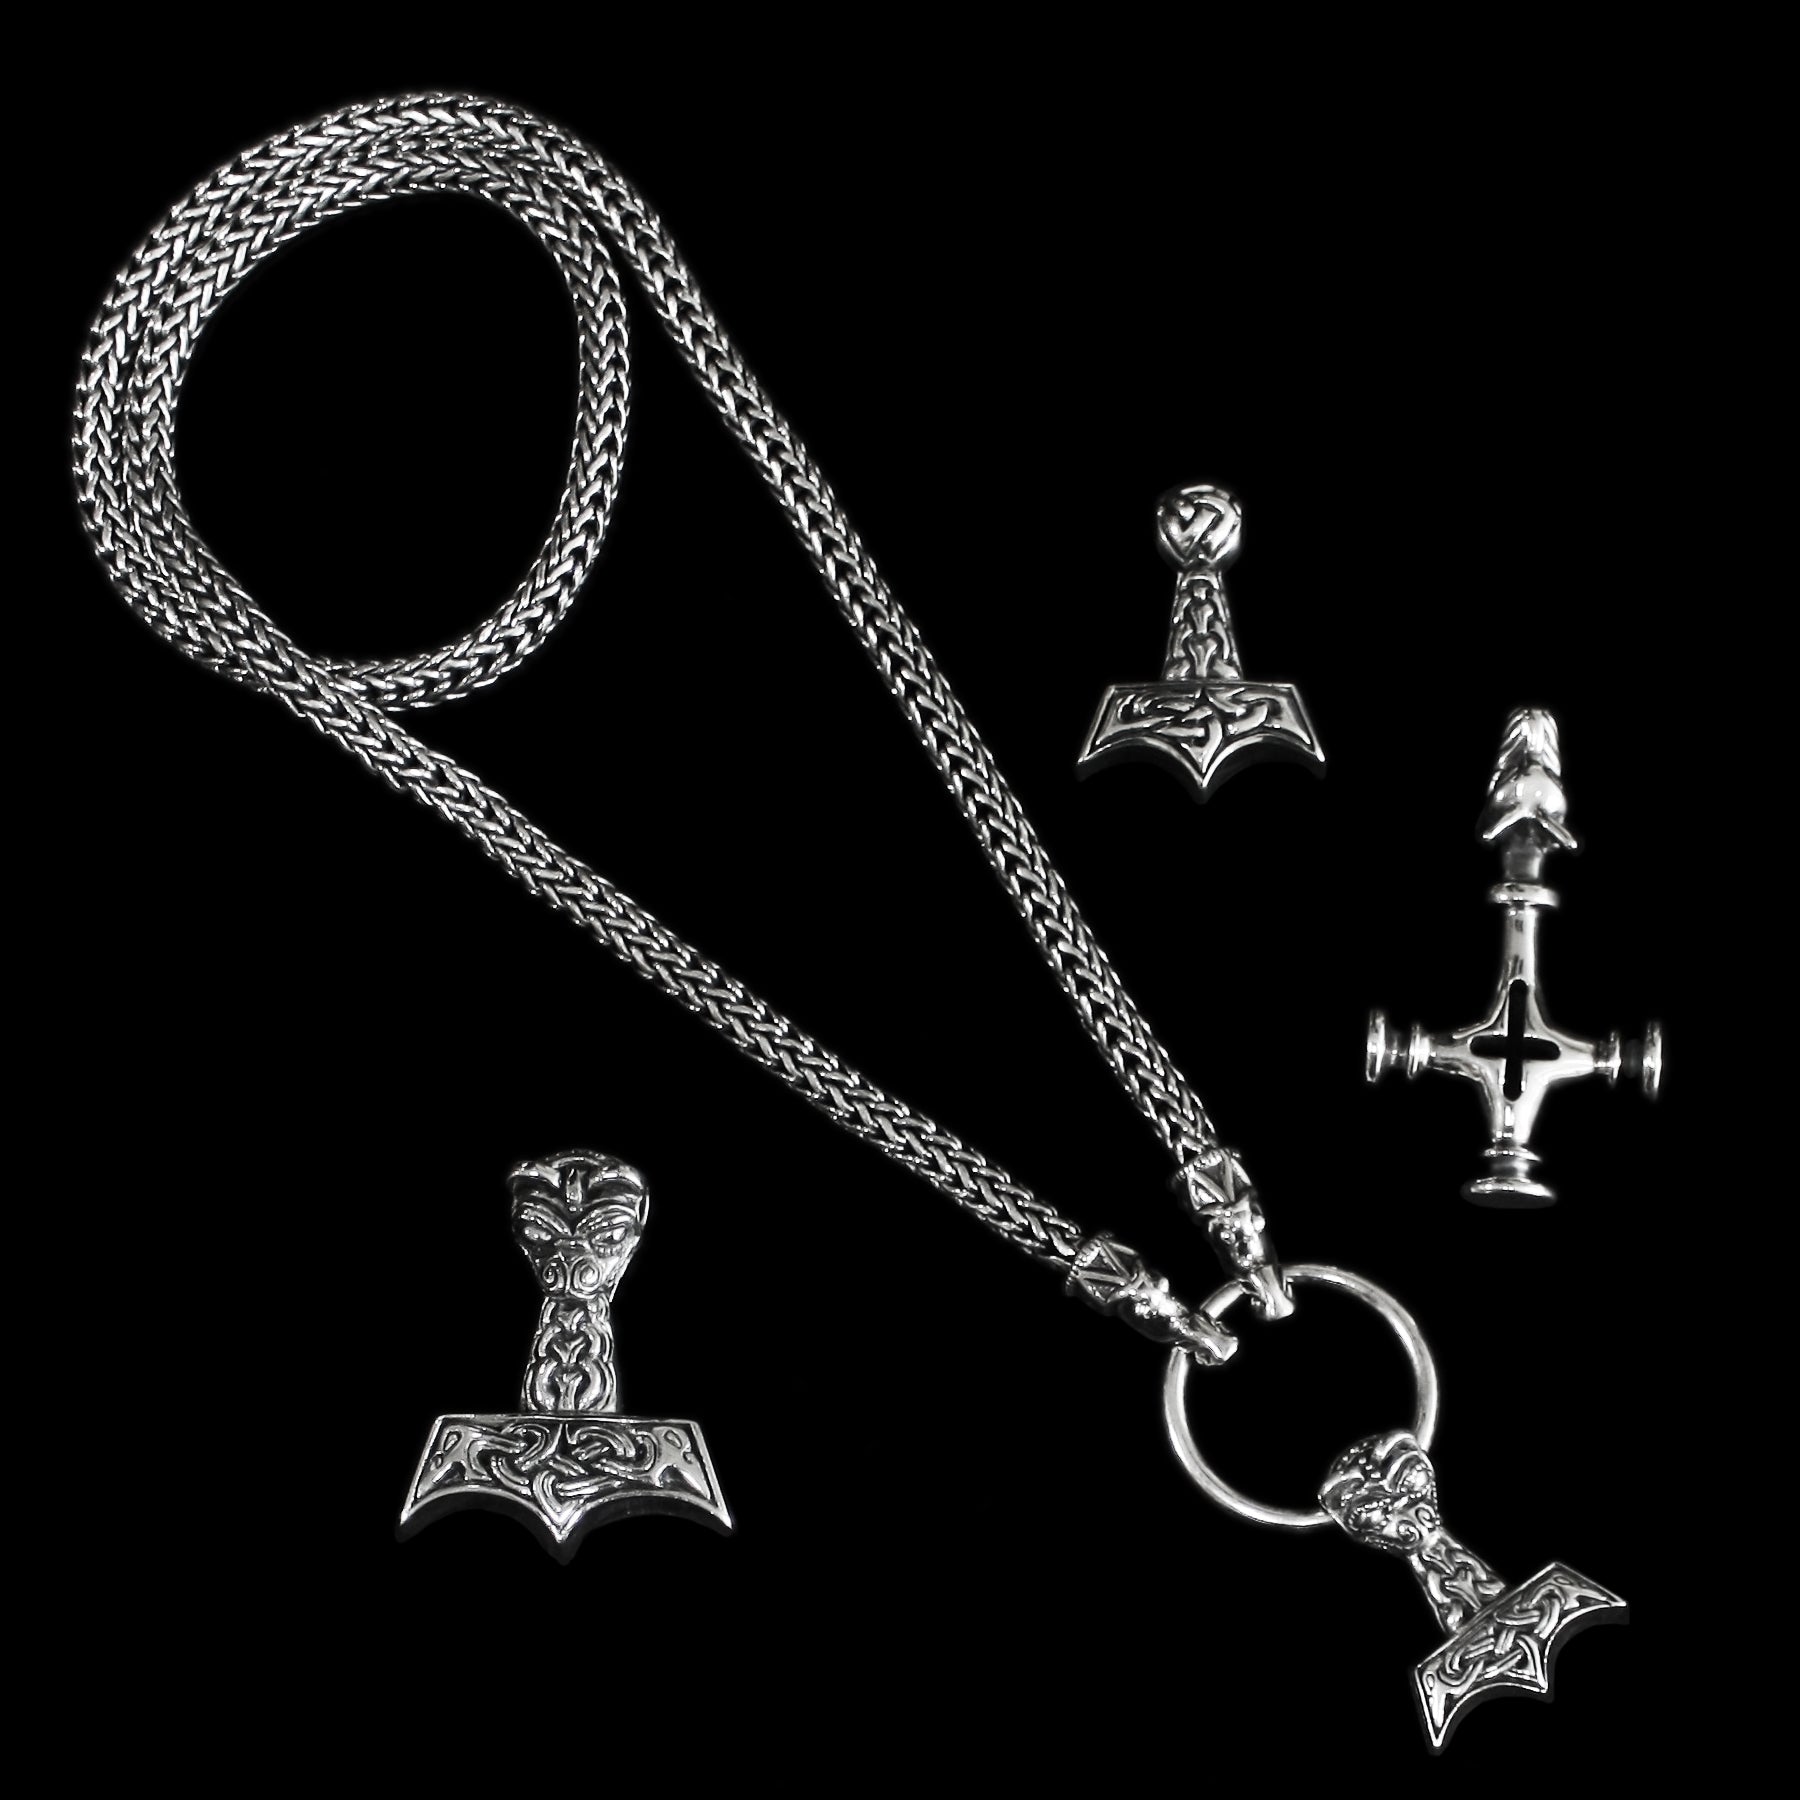 6mm Thick Silver Snake Chain Thor's Hammer Necklace with Gotland Dragon Heads & Thor's Hammer Selection - Viking Jewelry